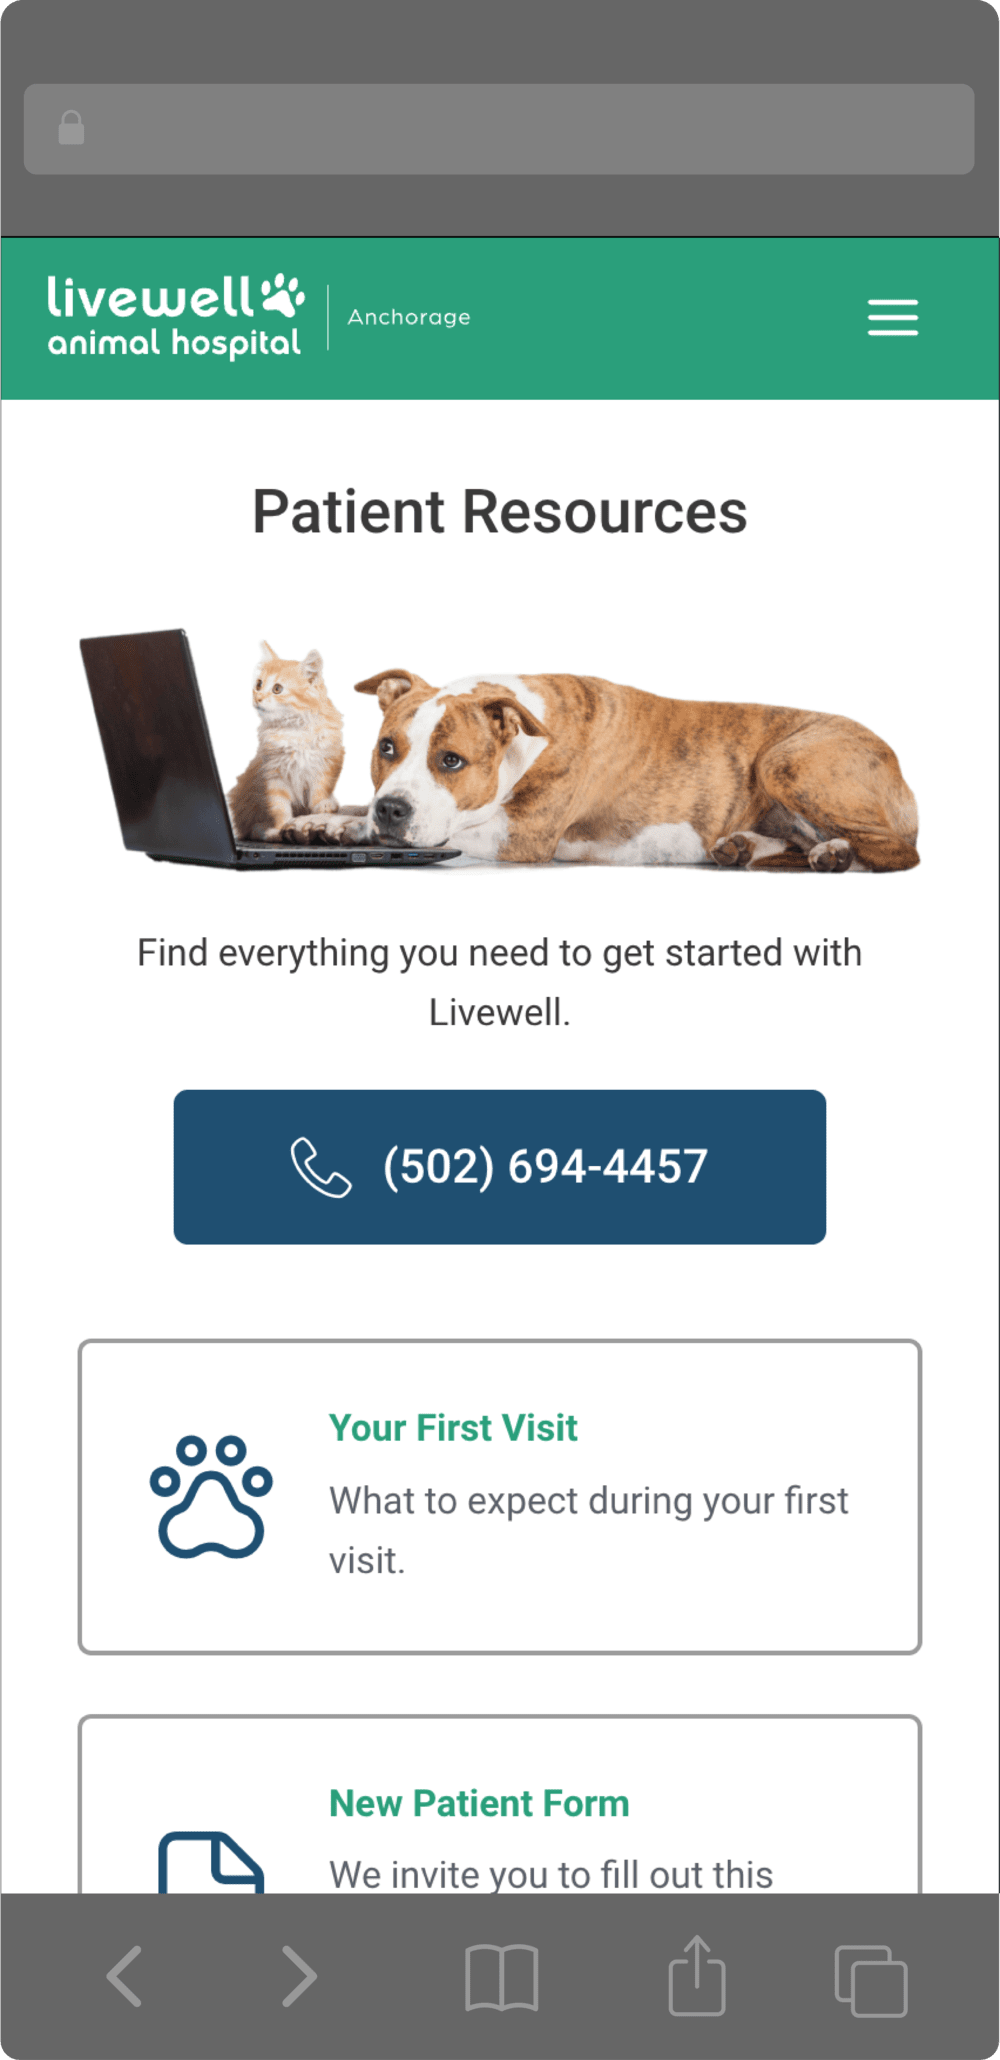 A screenshot of Livewell Animal Hospital's mobile resources page